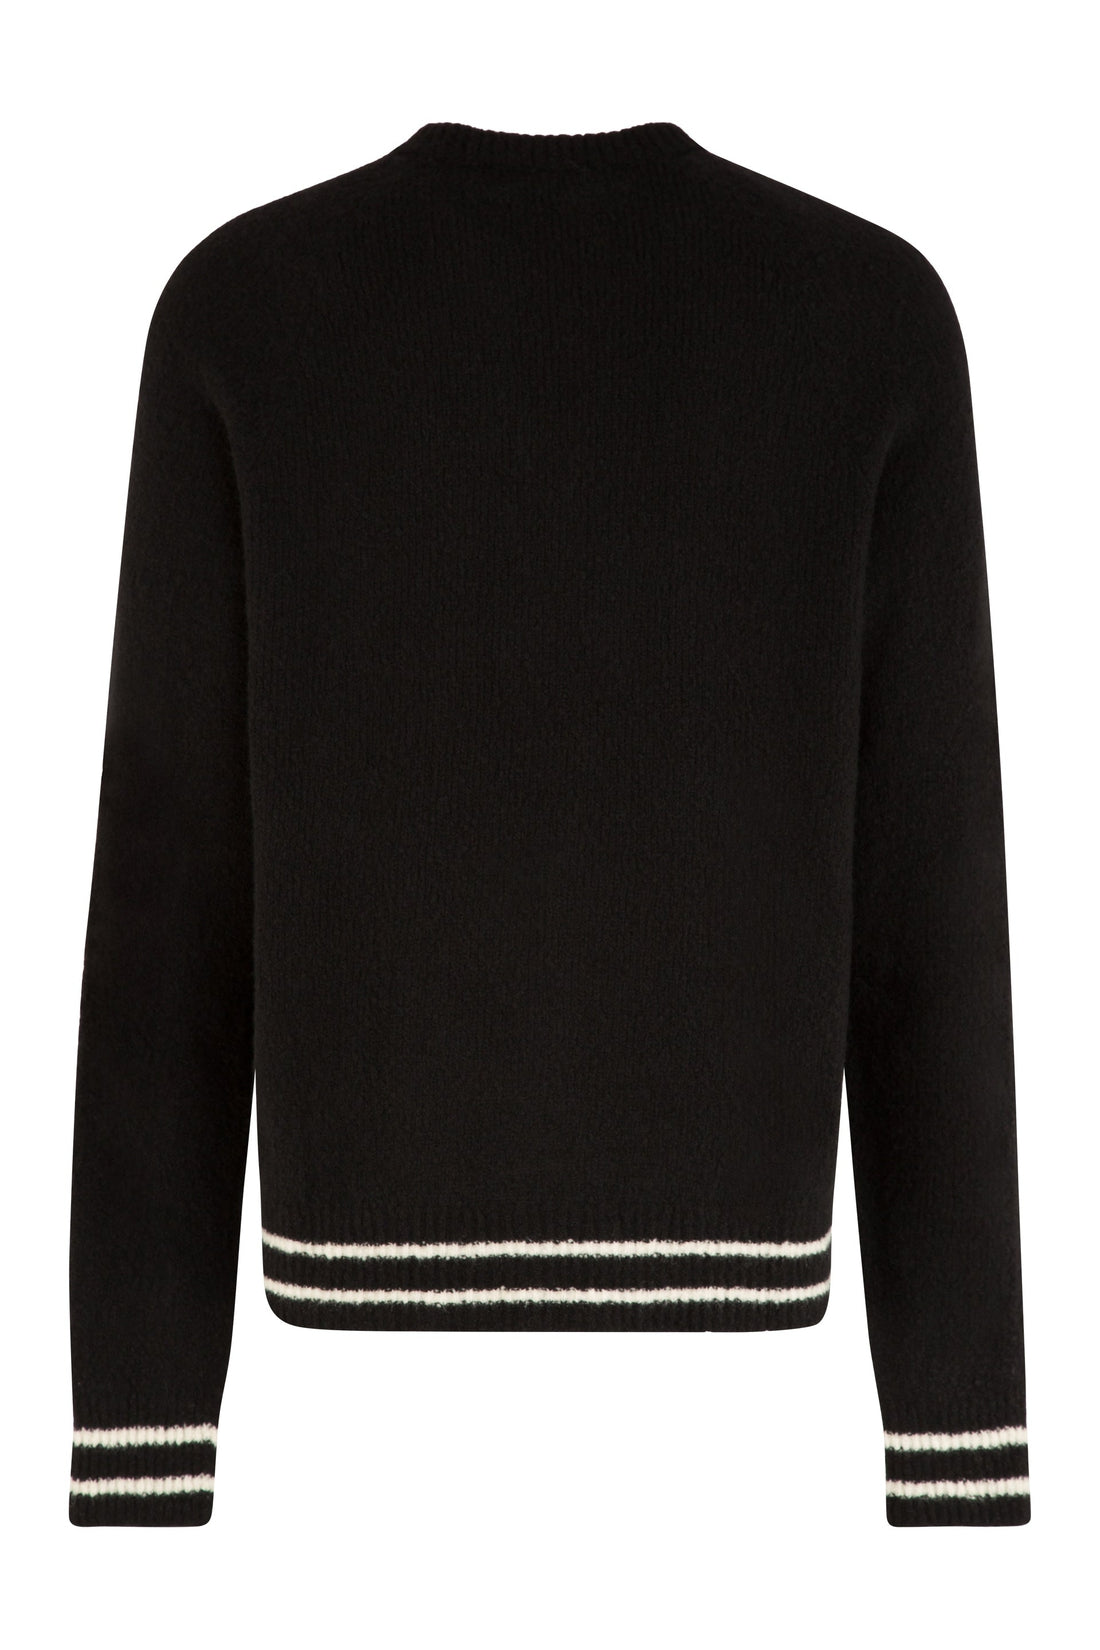 Balmain-OUTLET-SALE-Virgin wool and cashmere pullover-ARCHIVIST